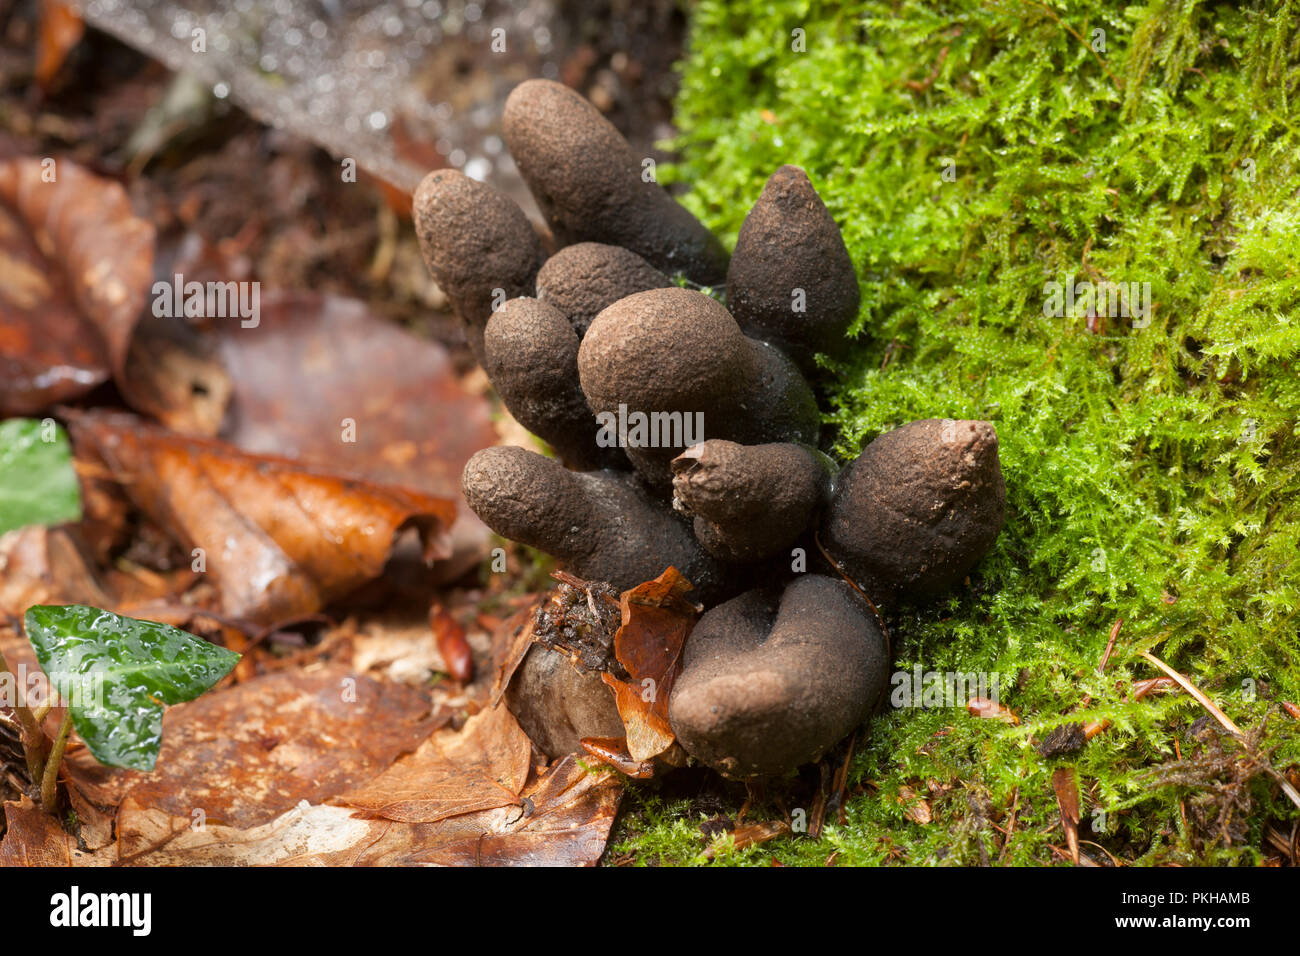 Dead Man’s Fingers, Xylaria polymorpha, growing on a tree stump in the New Forest Hampshire  England UK GB Stock Photo